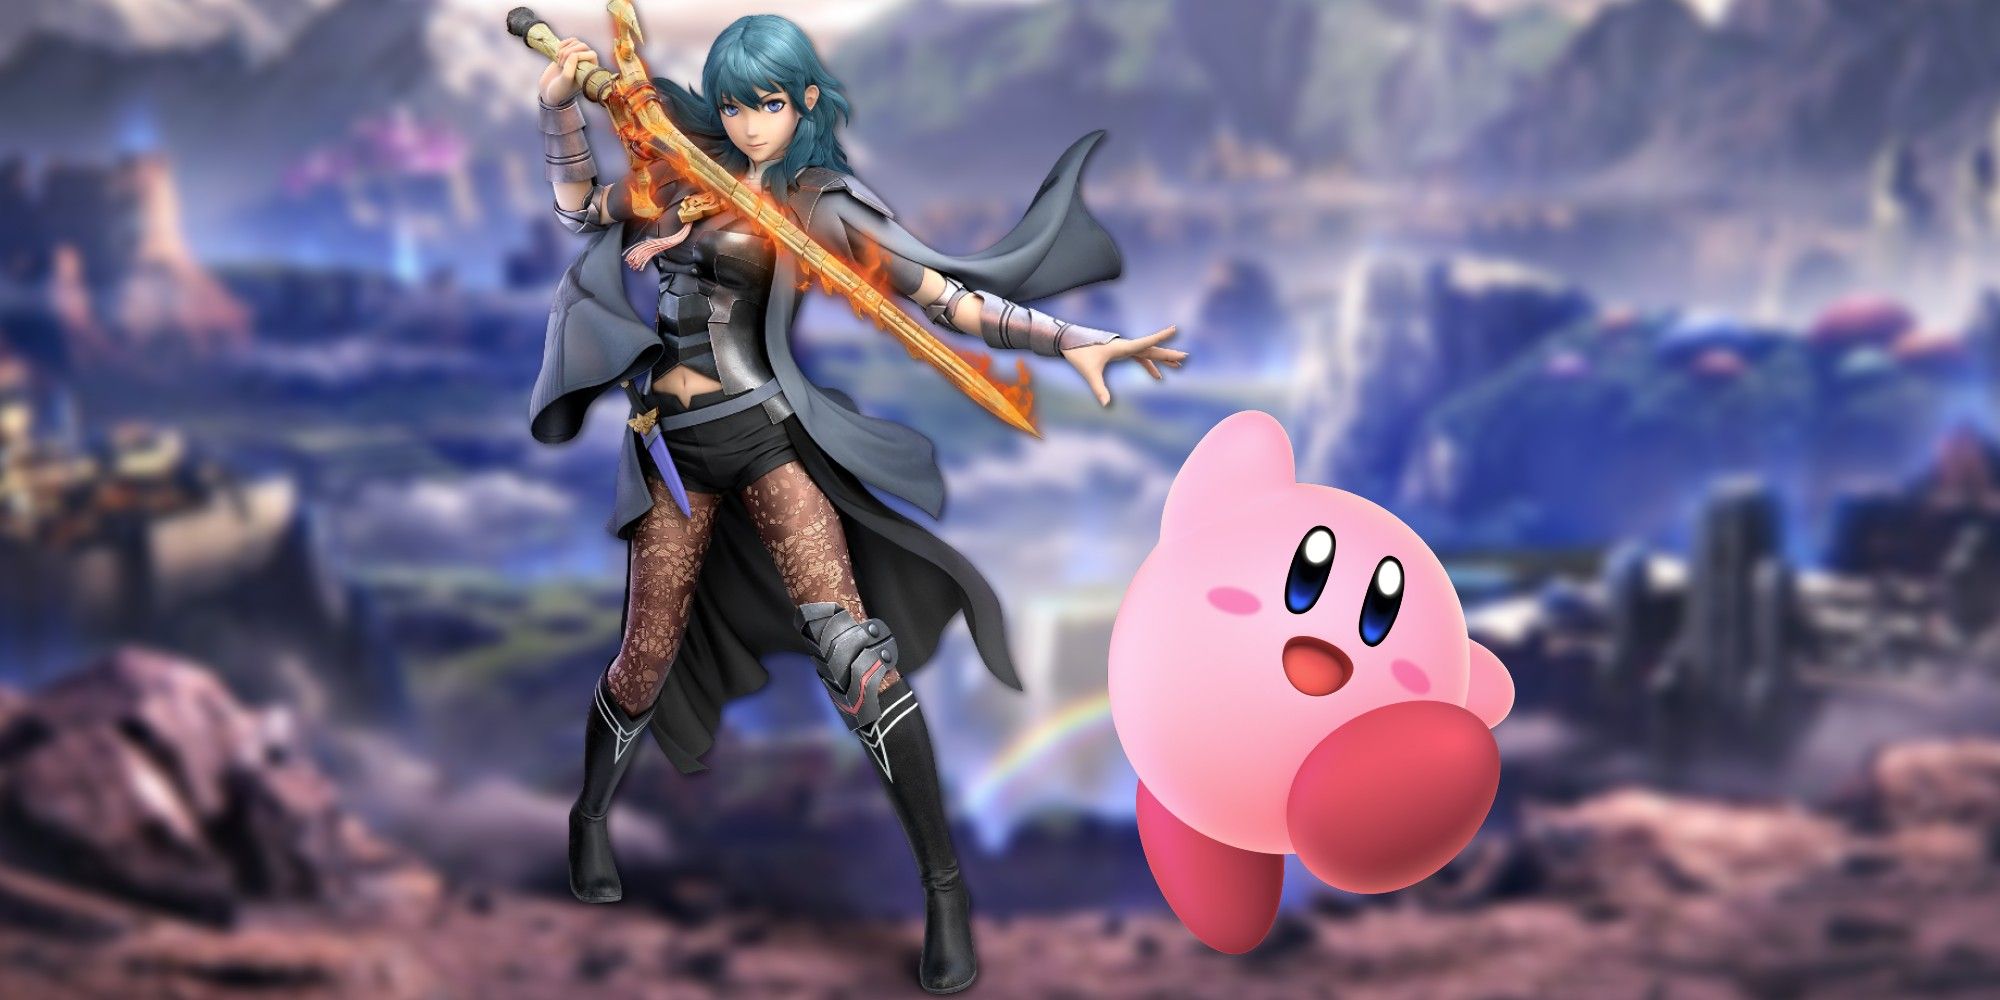 kirby and byleth in smash bros ultimate